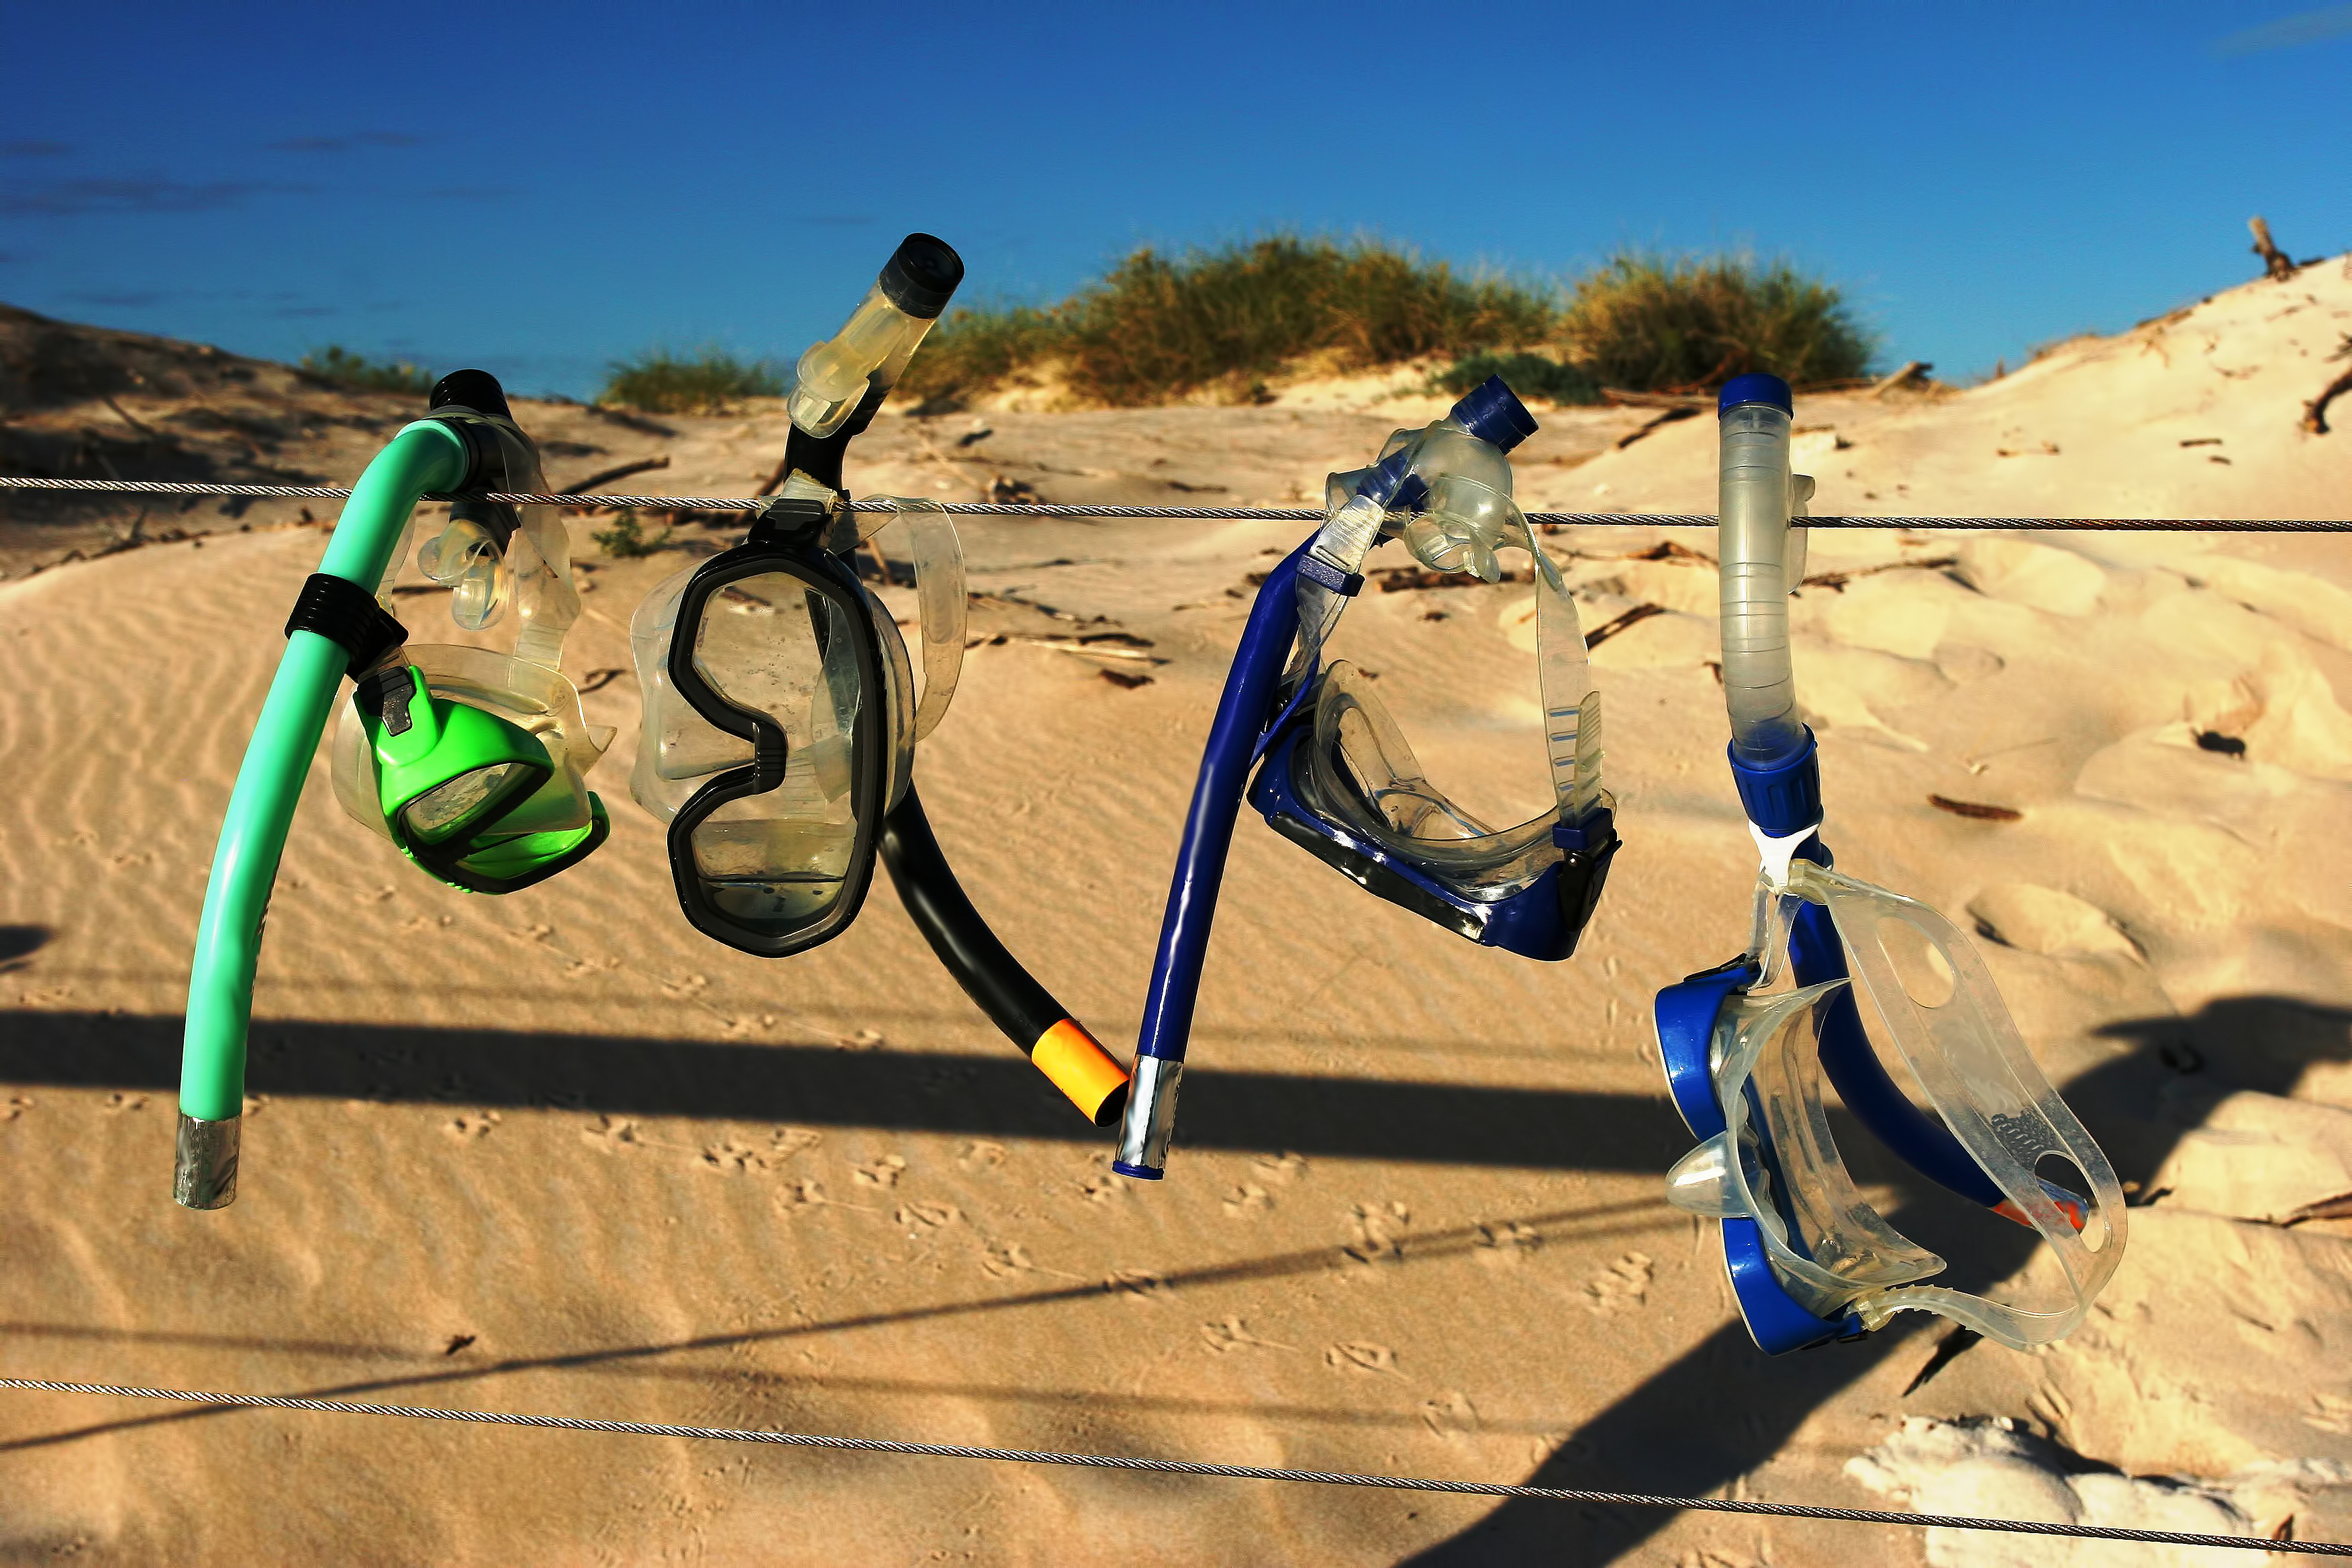 Snorkelling Gear Drying on a Wire Fence